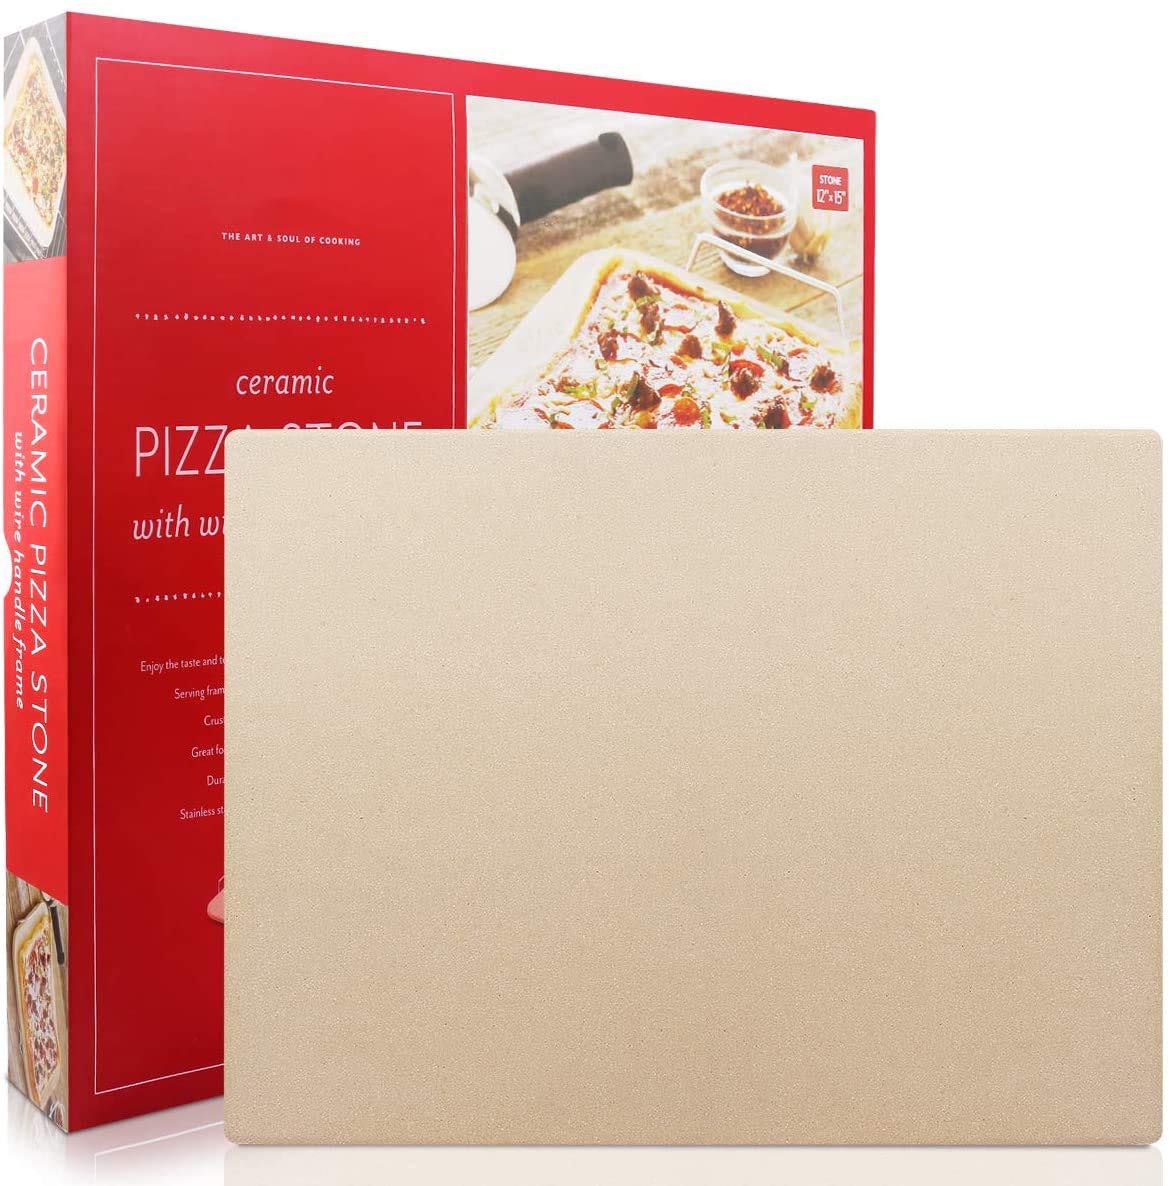 Pizza Stone, Engineered Tuff Cordierite Durable, Heavy Duty Ceramic, Baking Stone, Pizza Pan, Perfect for Oven, BBQ and Grill, Thermal Shock Resistant, Durable and Safe, 15x12 Inch Rectangular